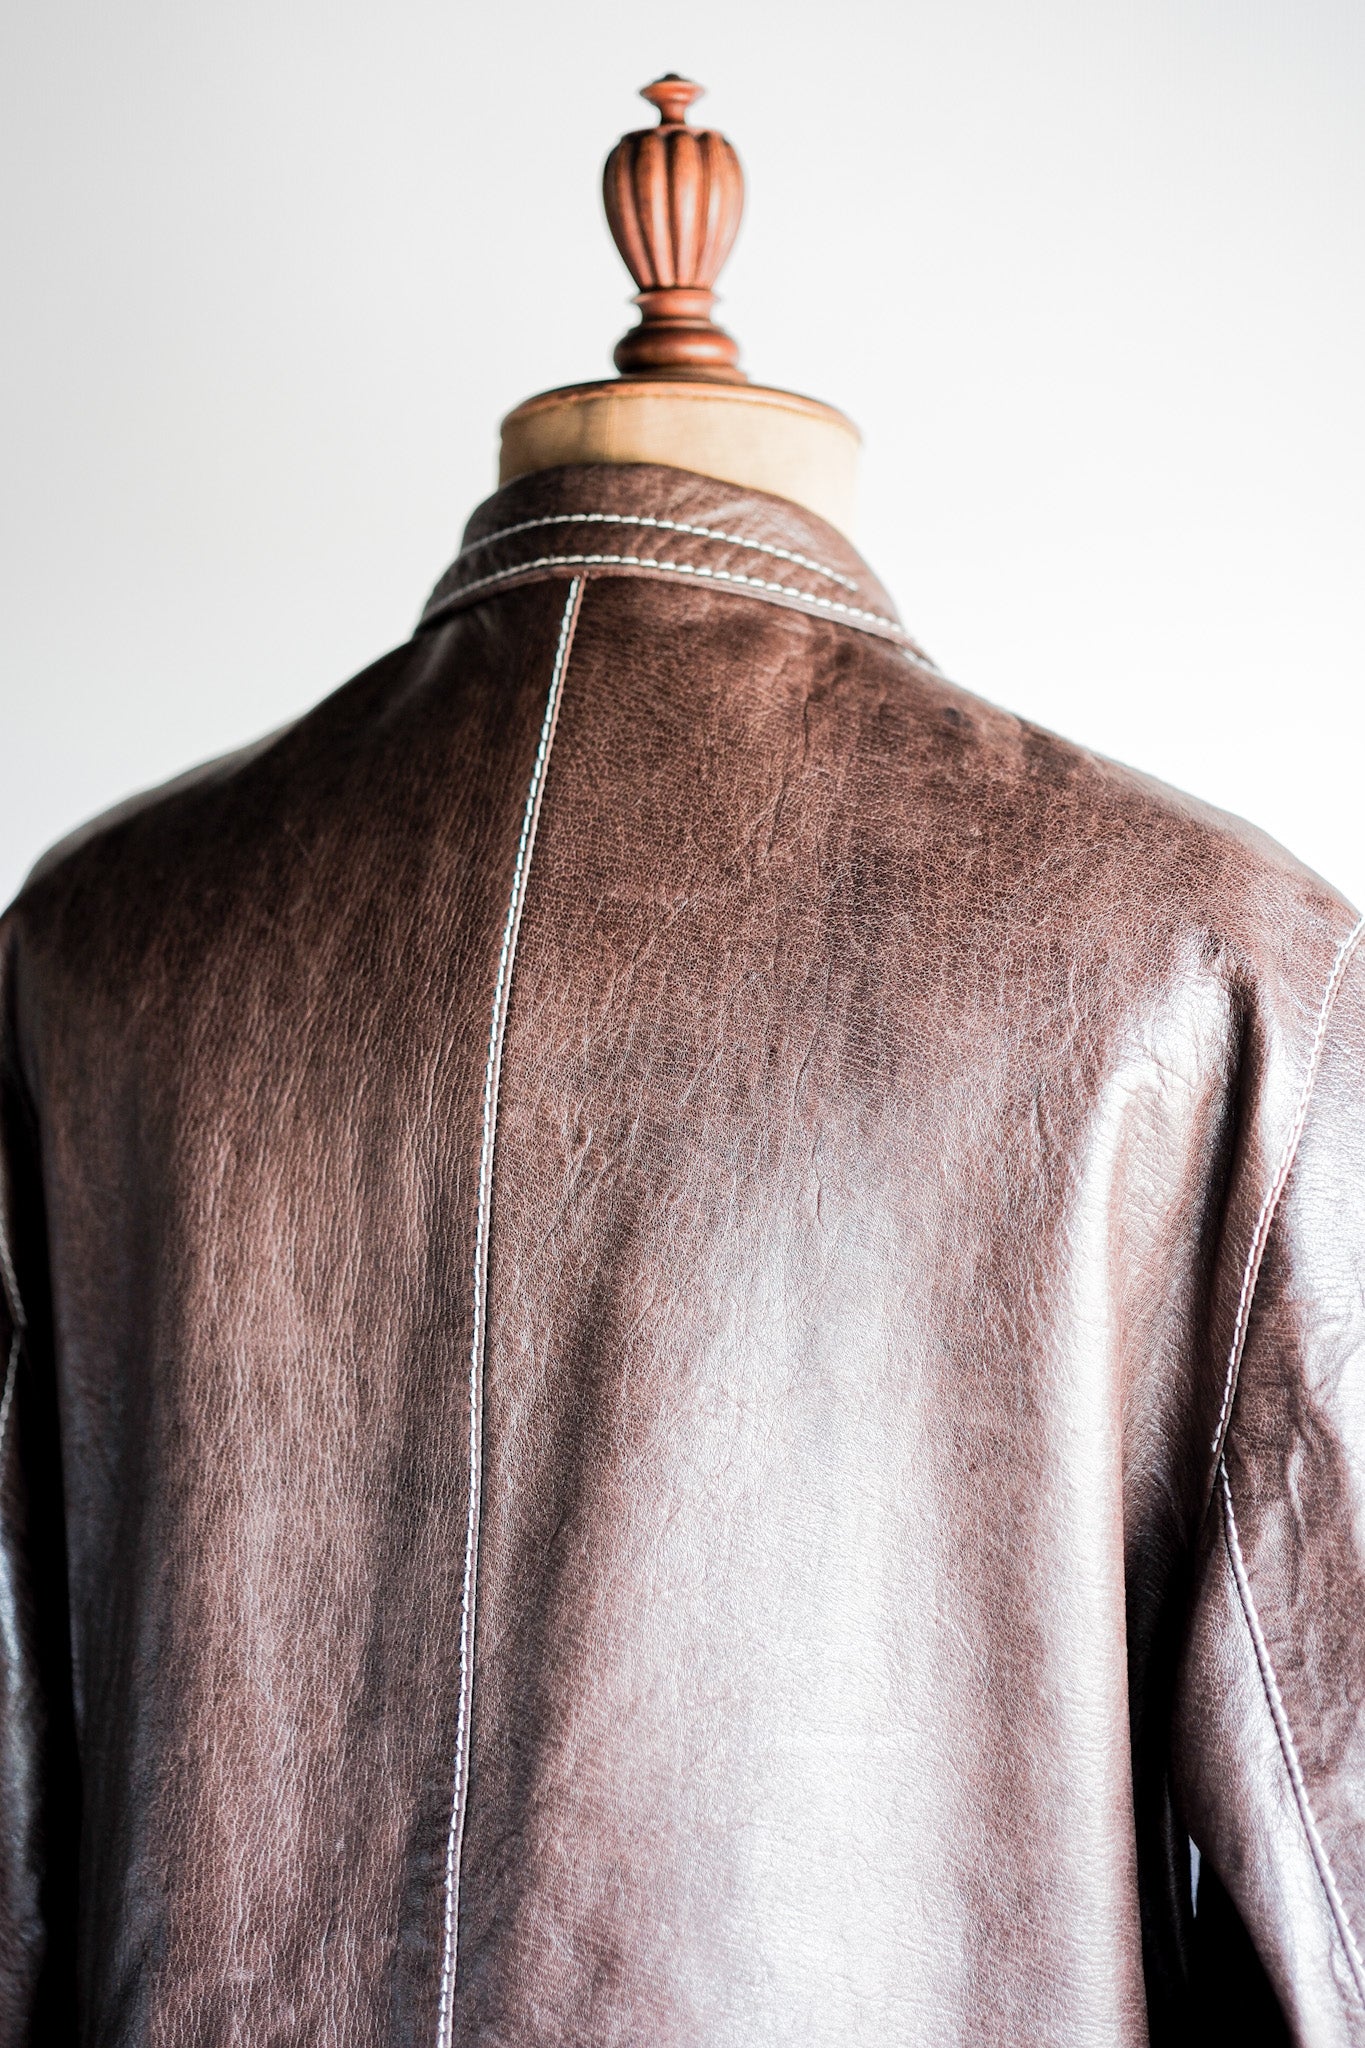 90's】Old ANNE MARIE BERETTA Leather Tailored Jacket Size.T42